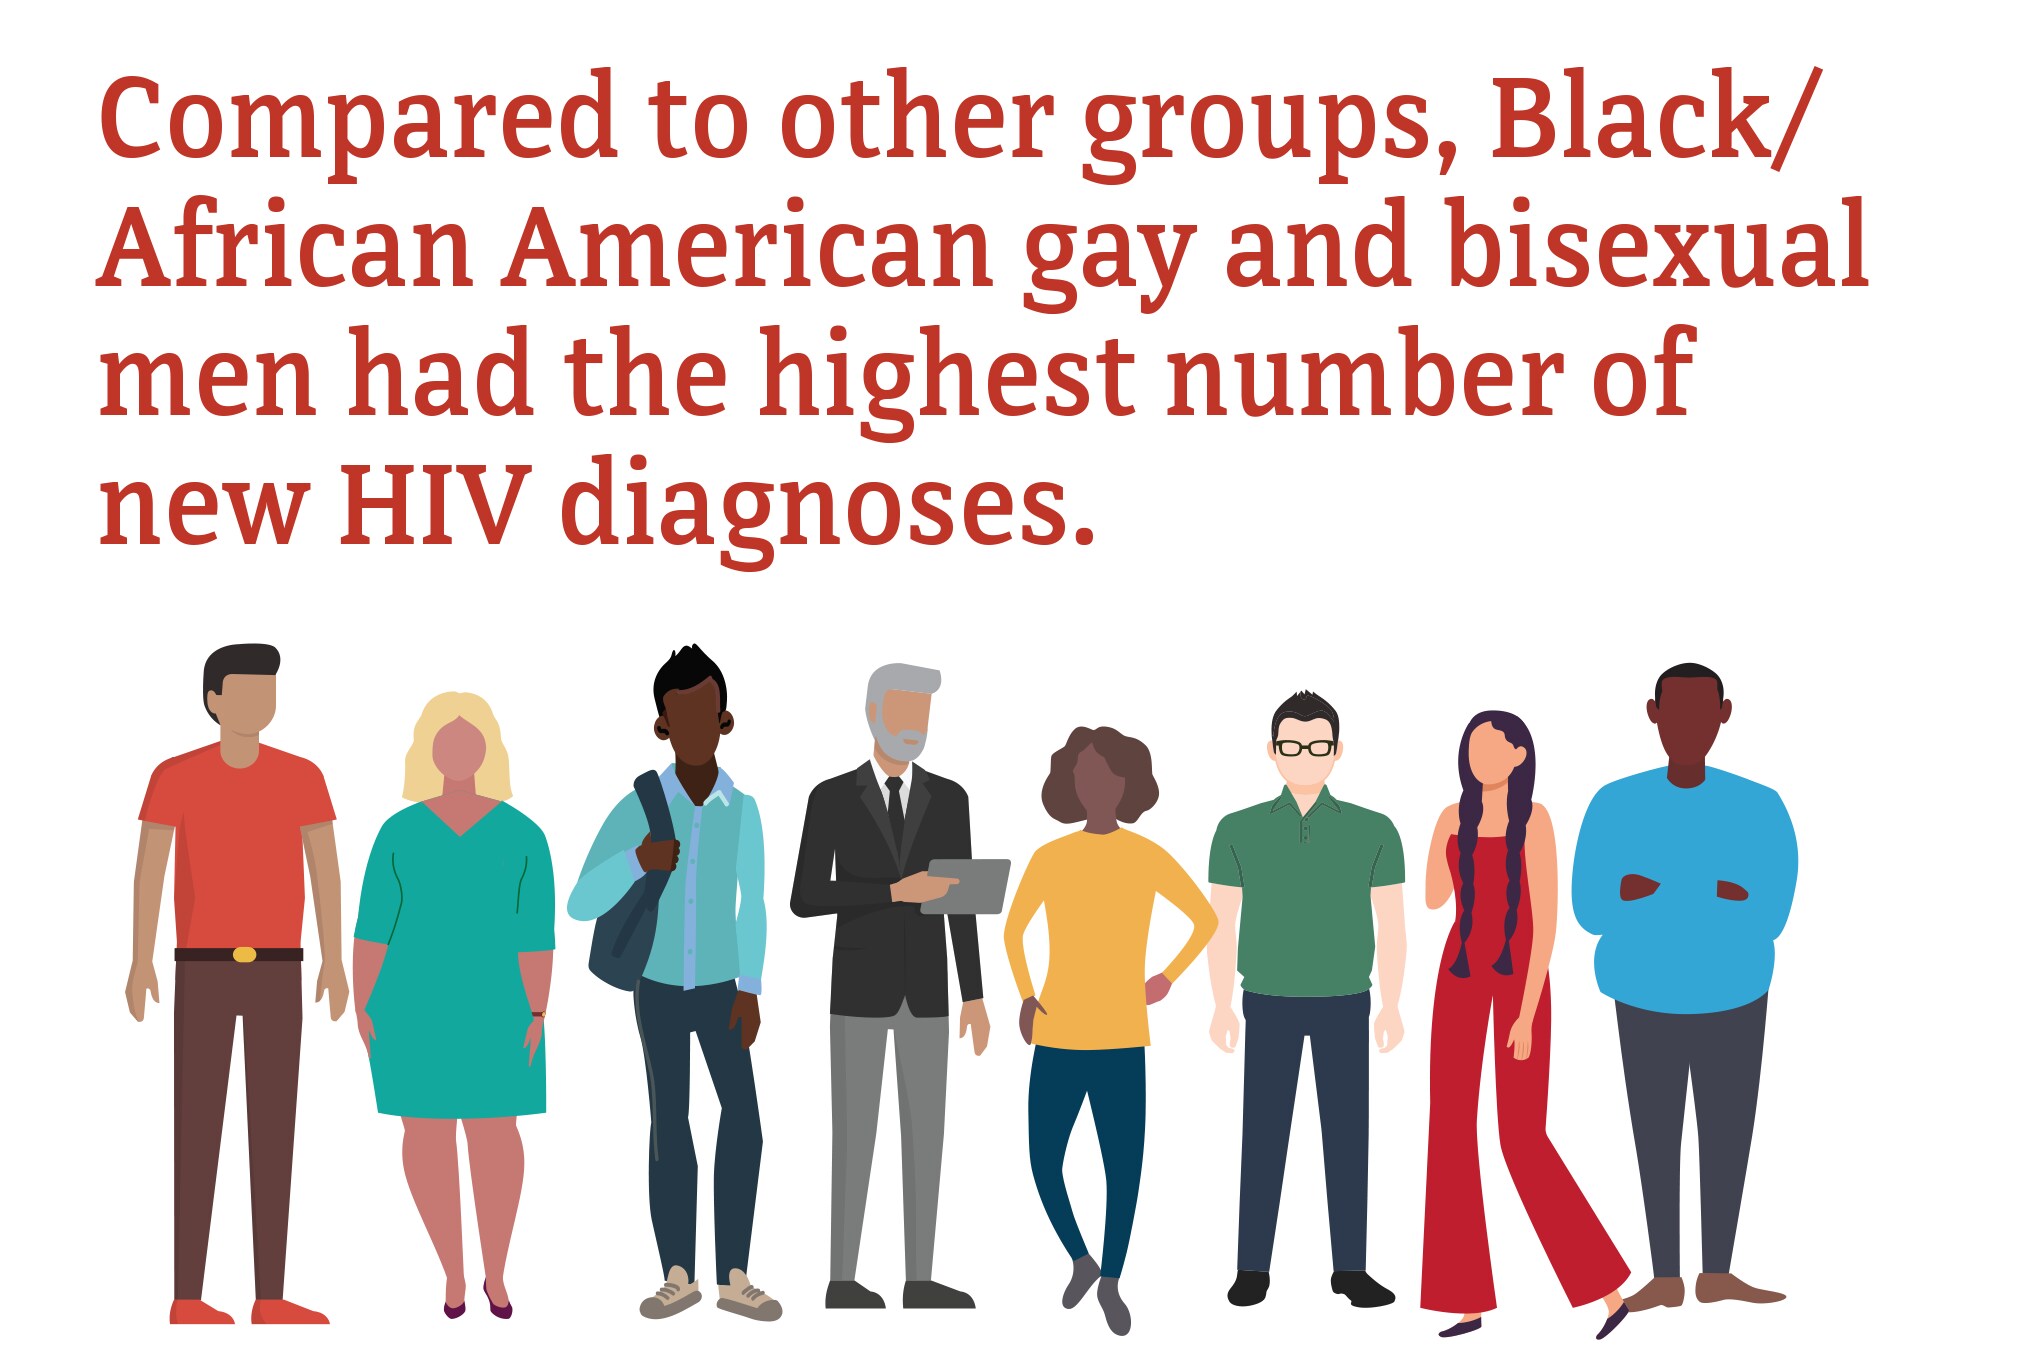 Compared to other groups, Black/African American gay and bisexual men had the highest number of new HIV diagnoses.